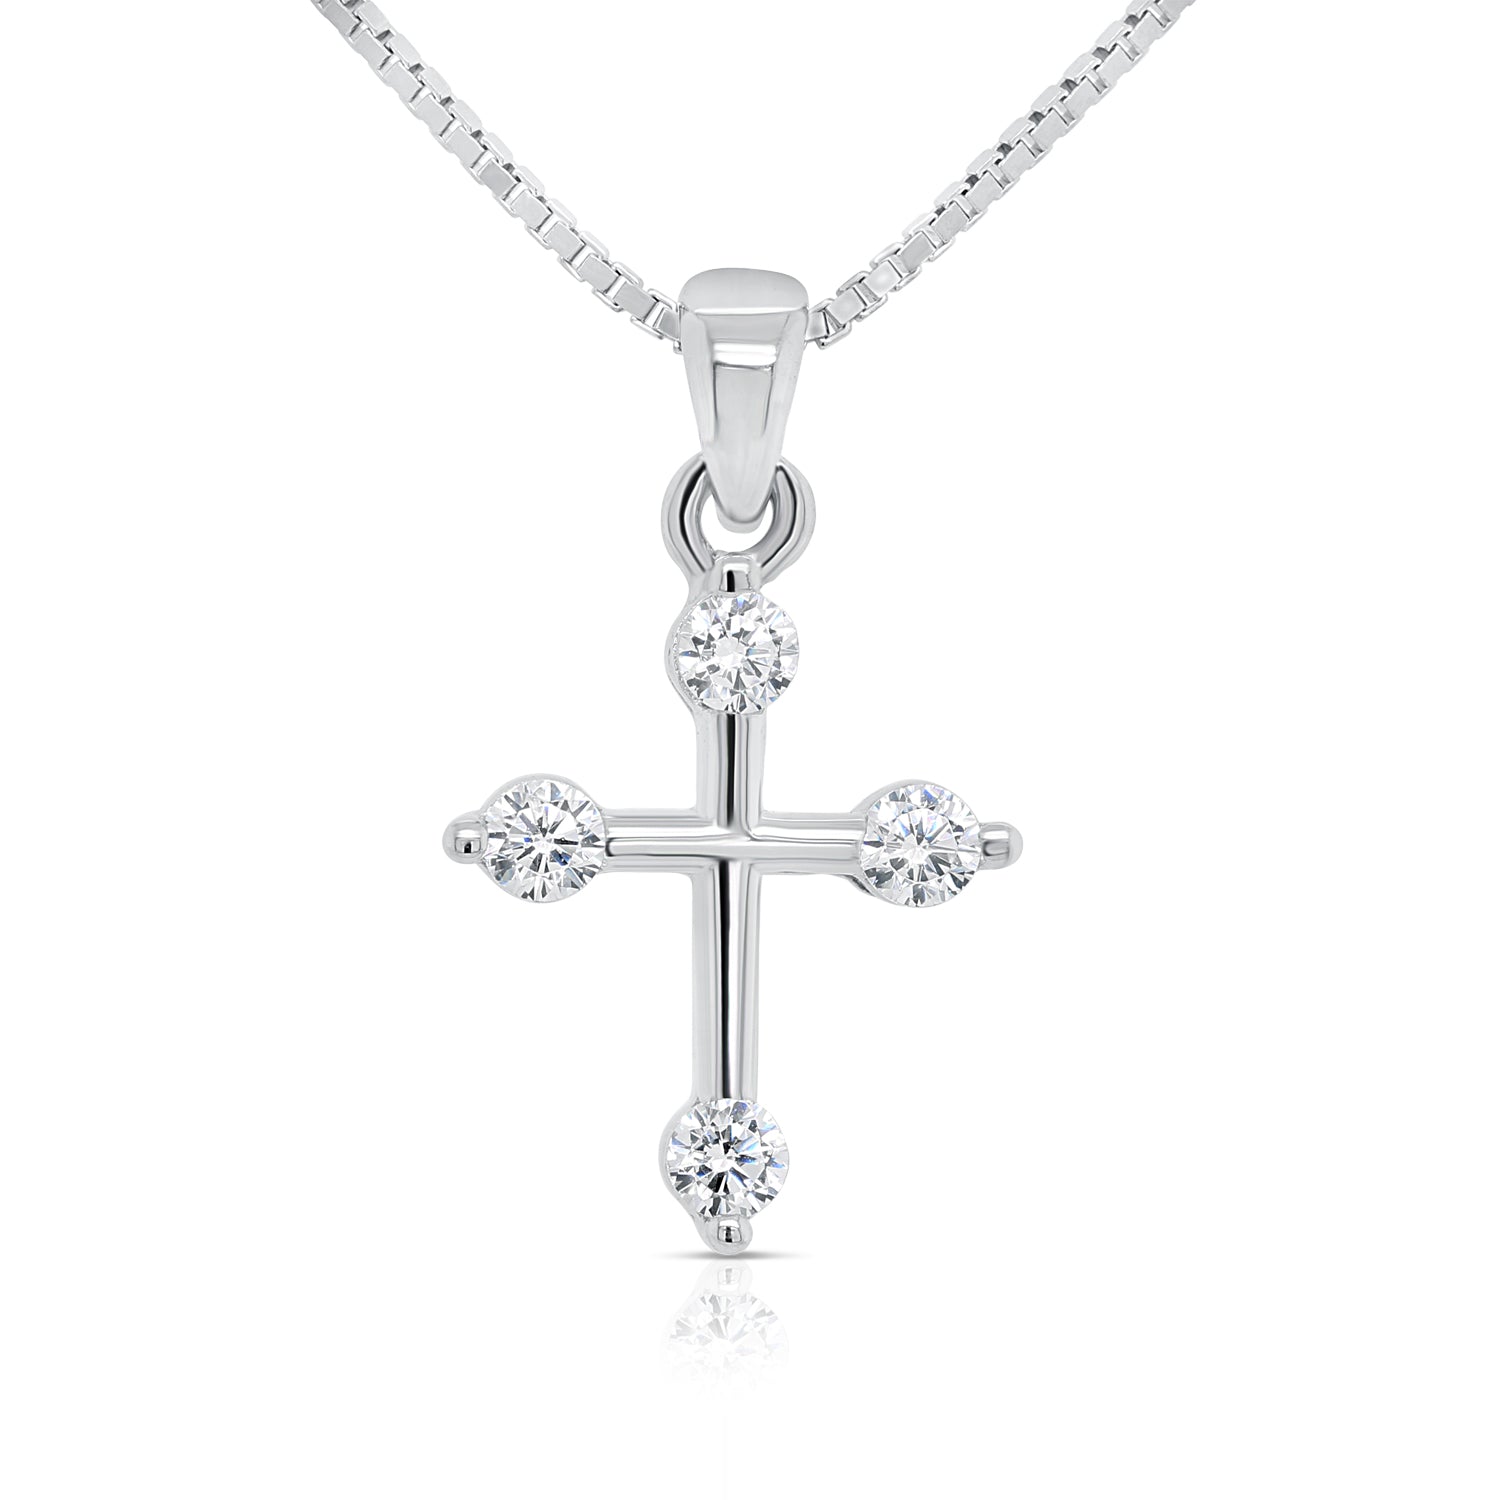 Tiny Cross Charm Necklace in Sterling Silver